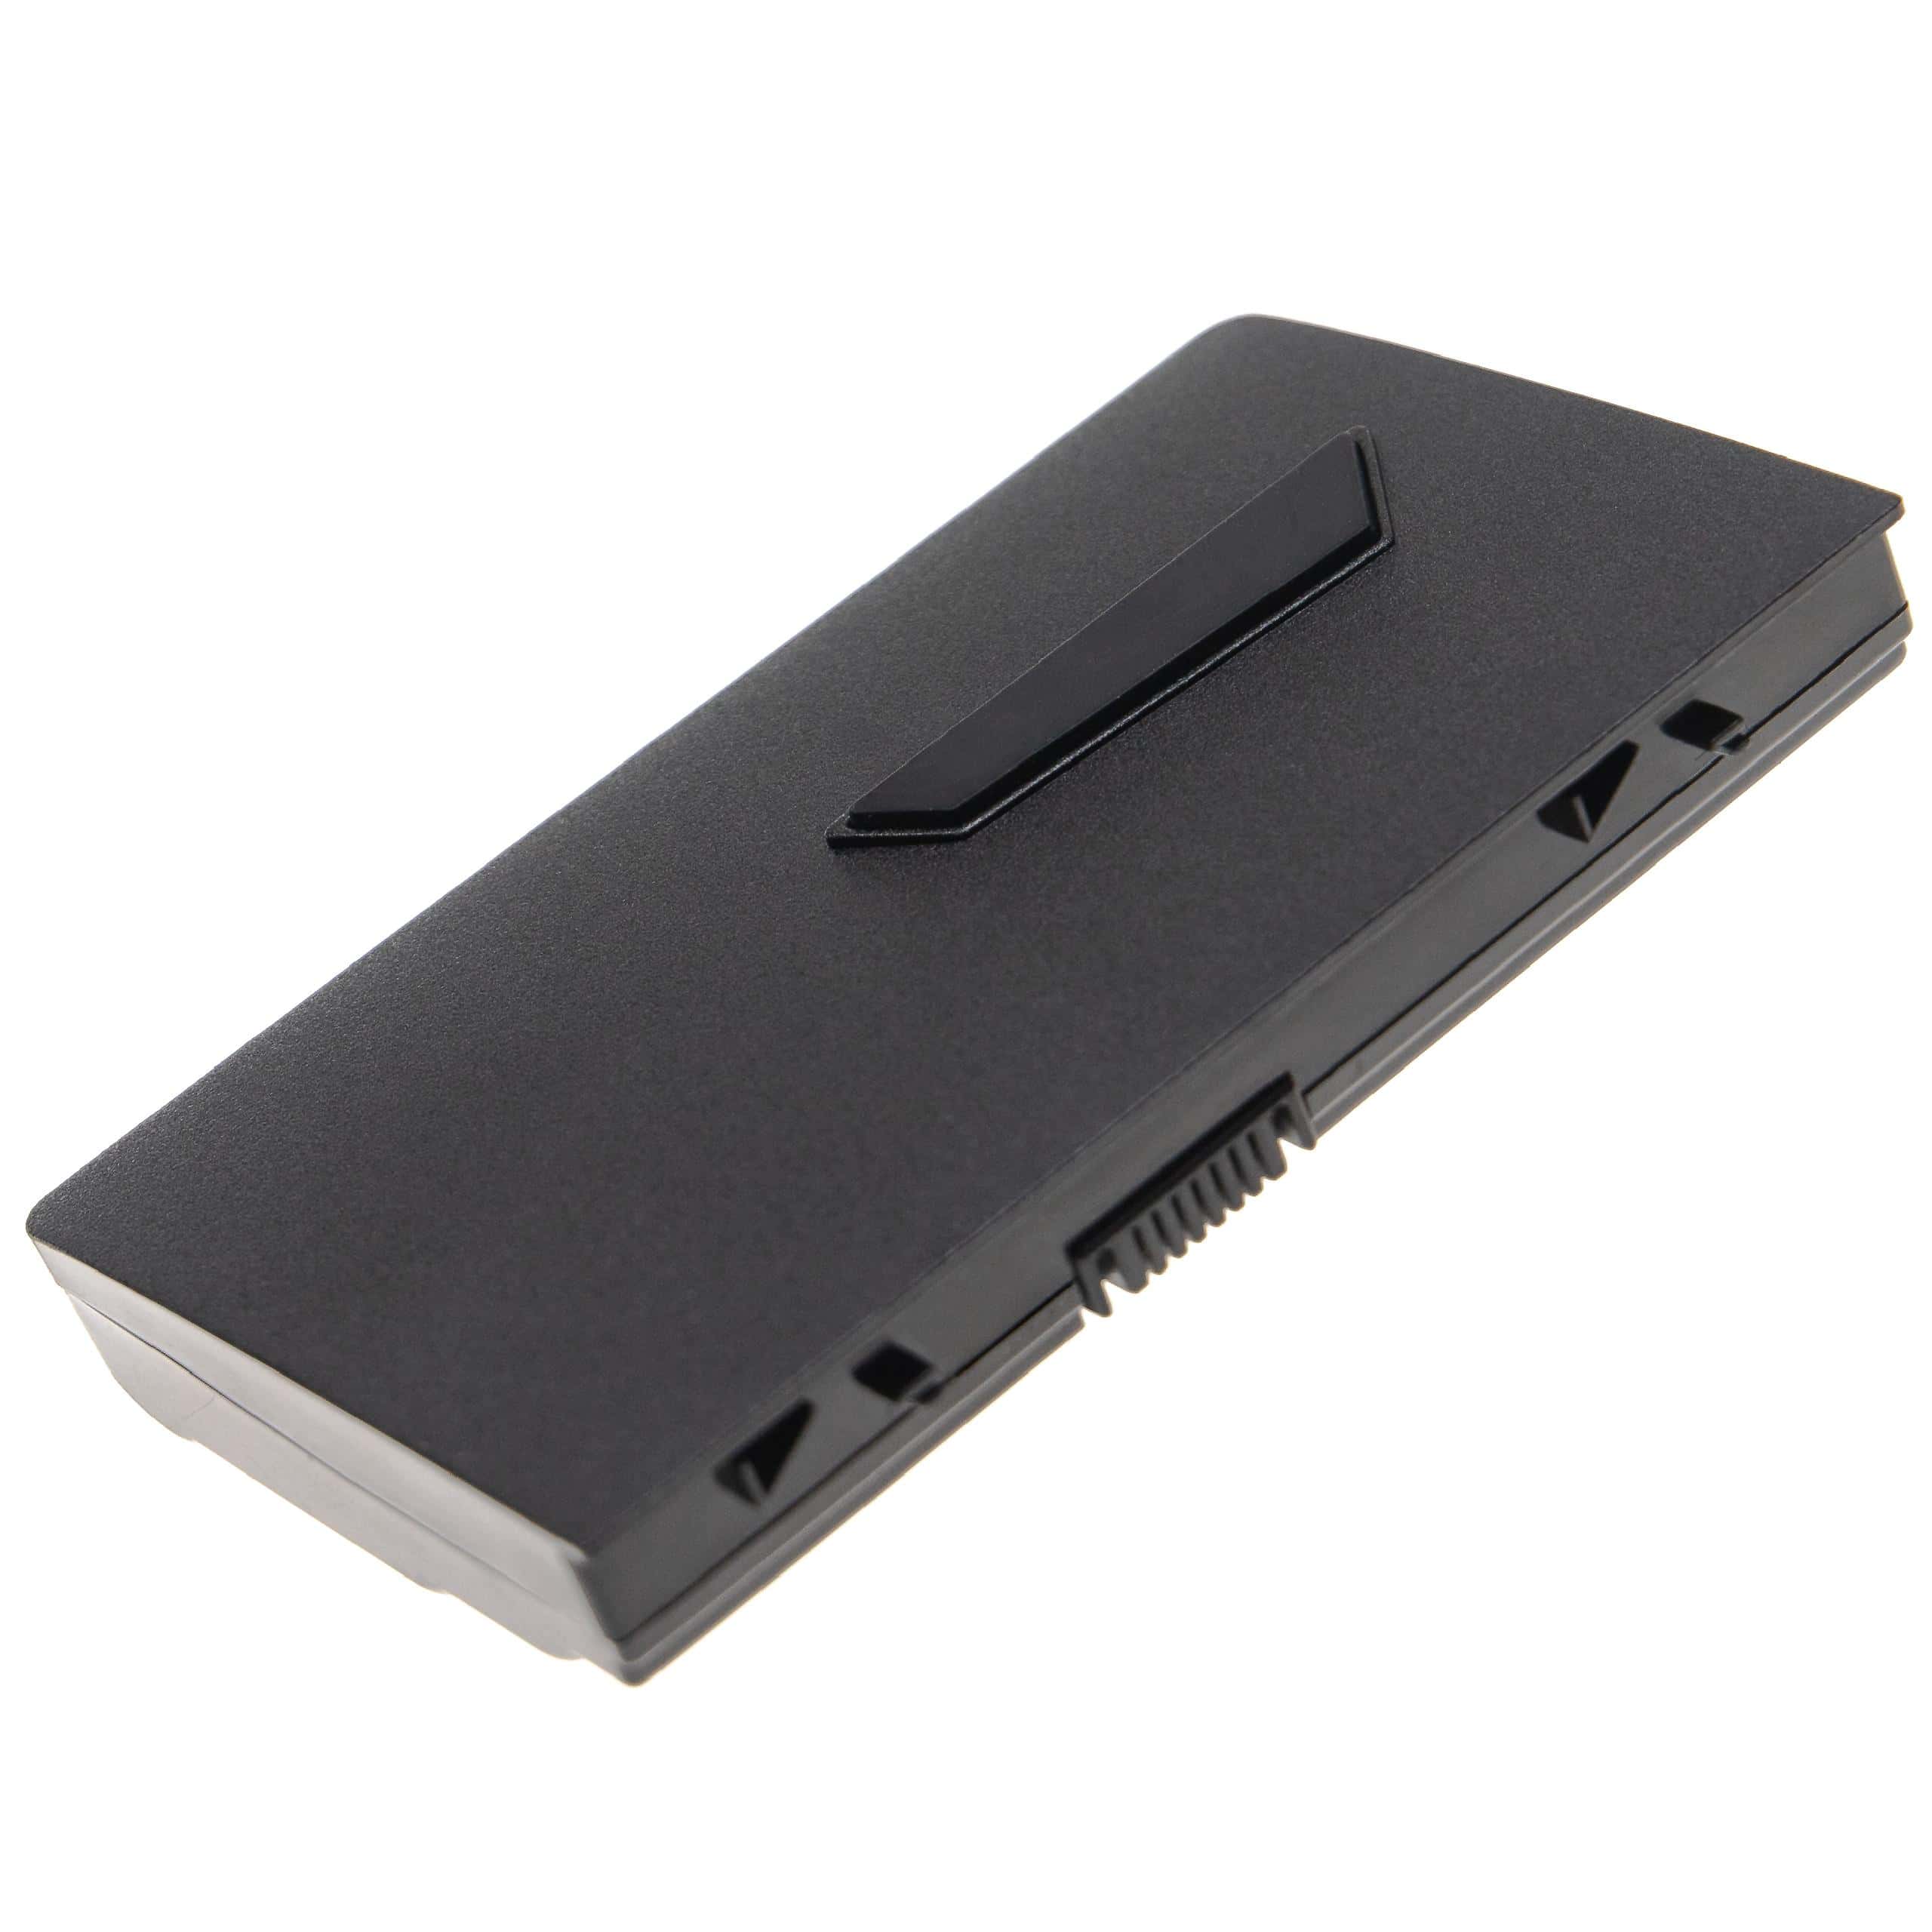 Notebook Battery Replacement for 6-87-P750S-4272, 6-87-P750S-4U73, 4ICR18/65-2 - 4400mAh 14.8V Li-Ion, black